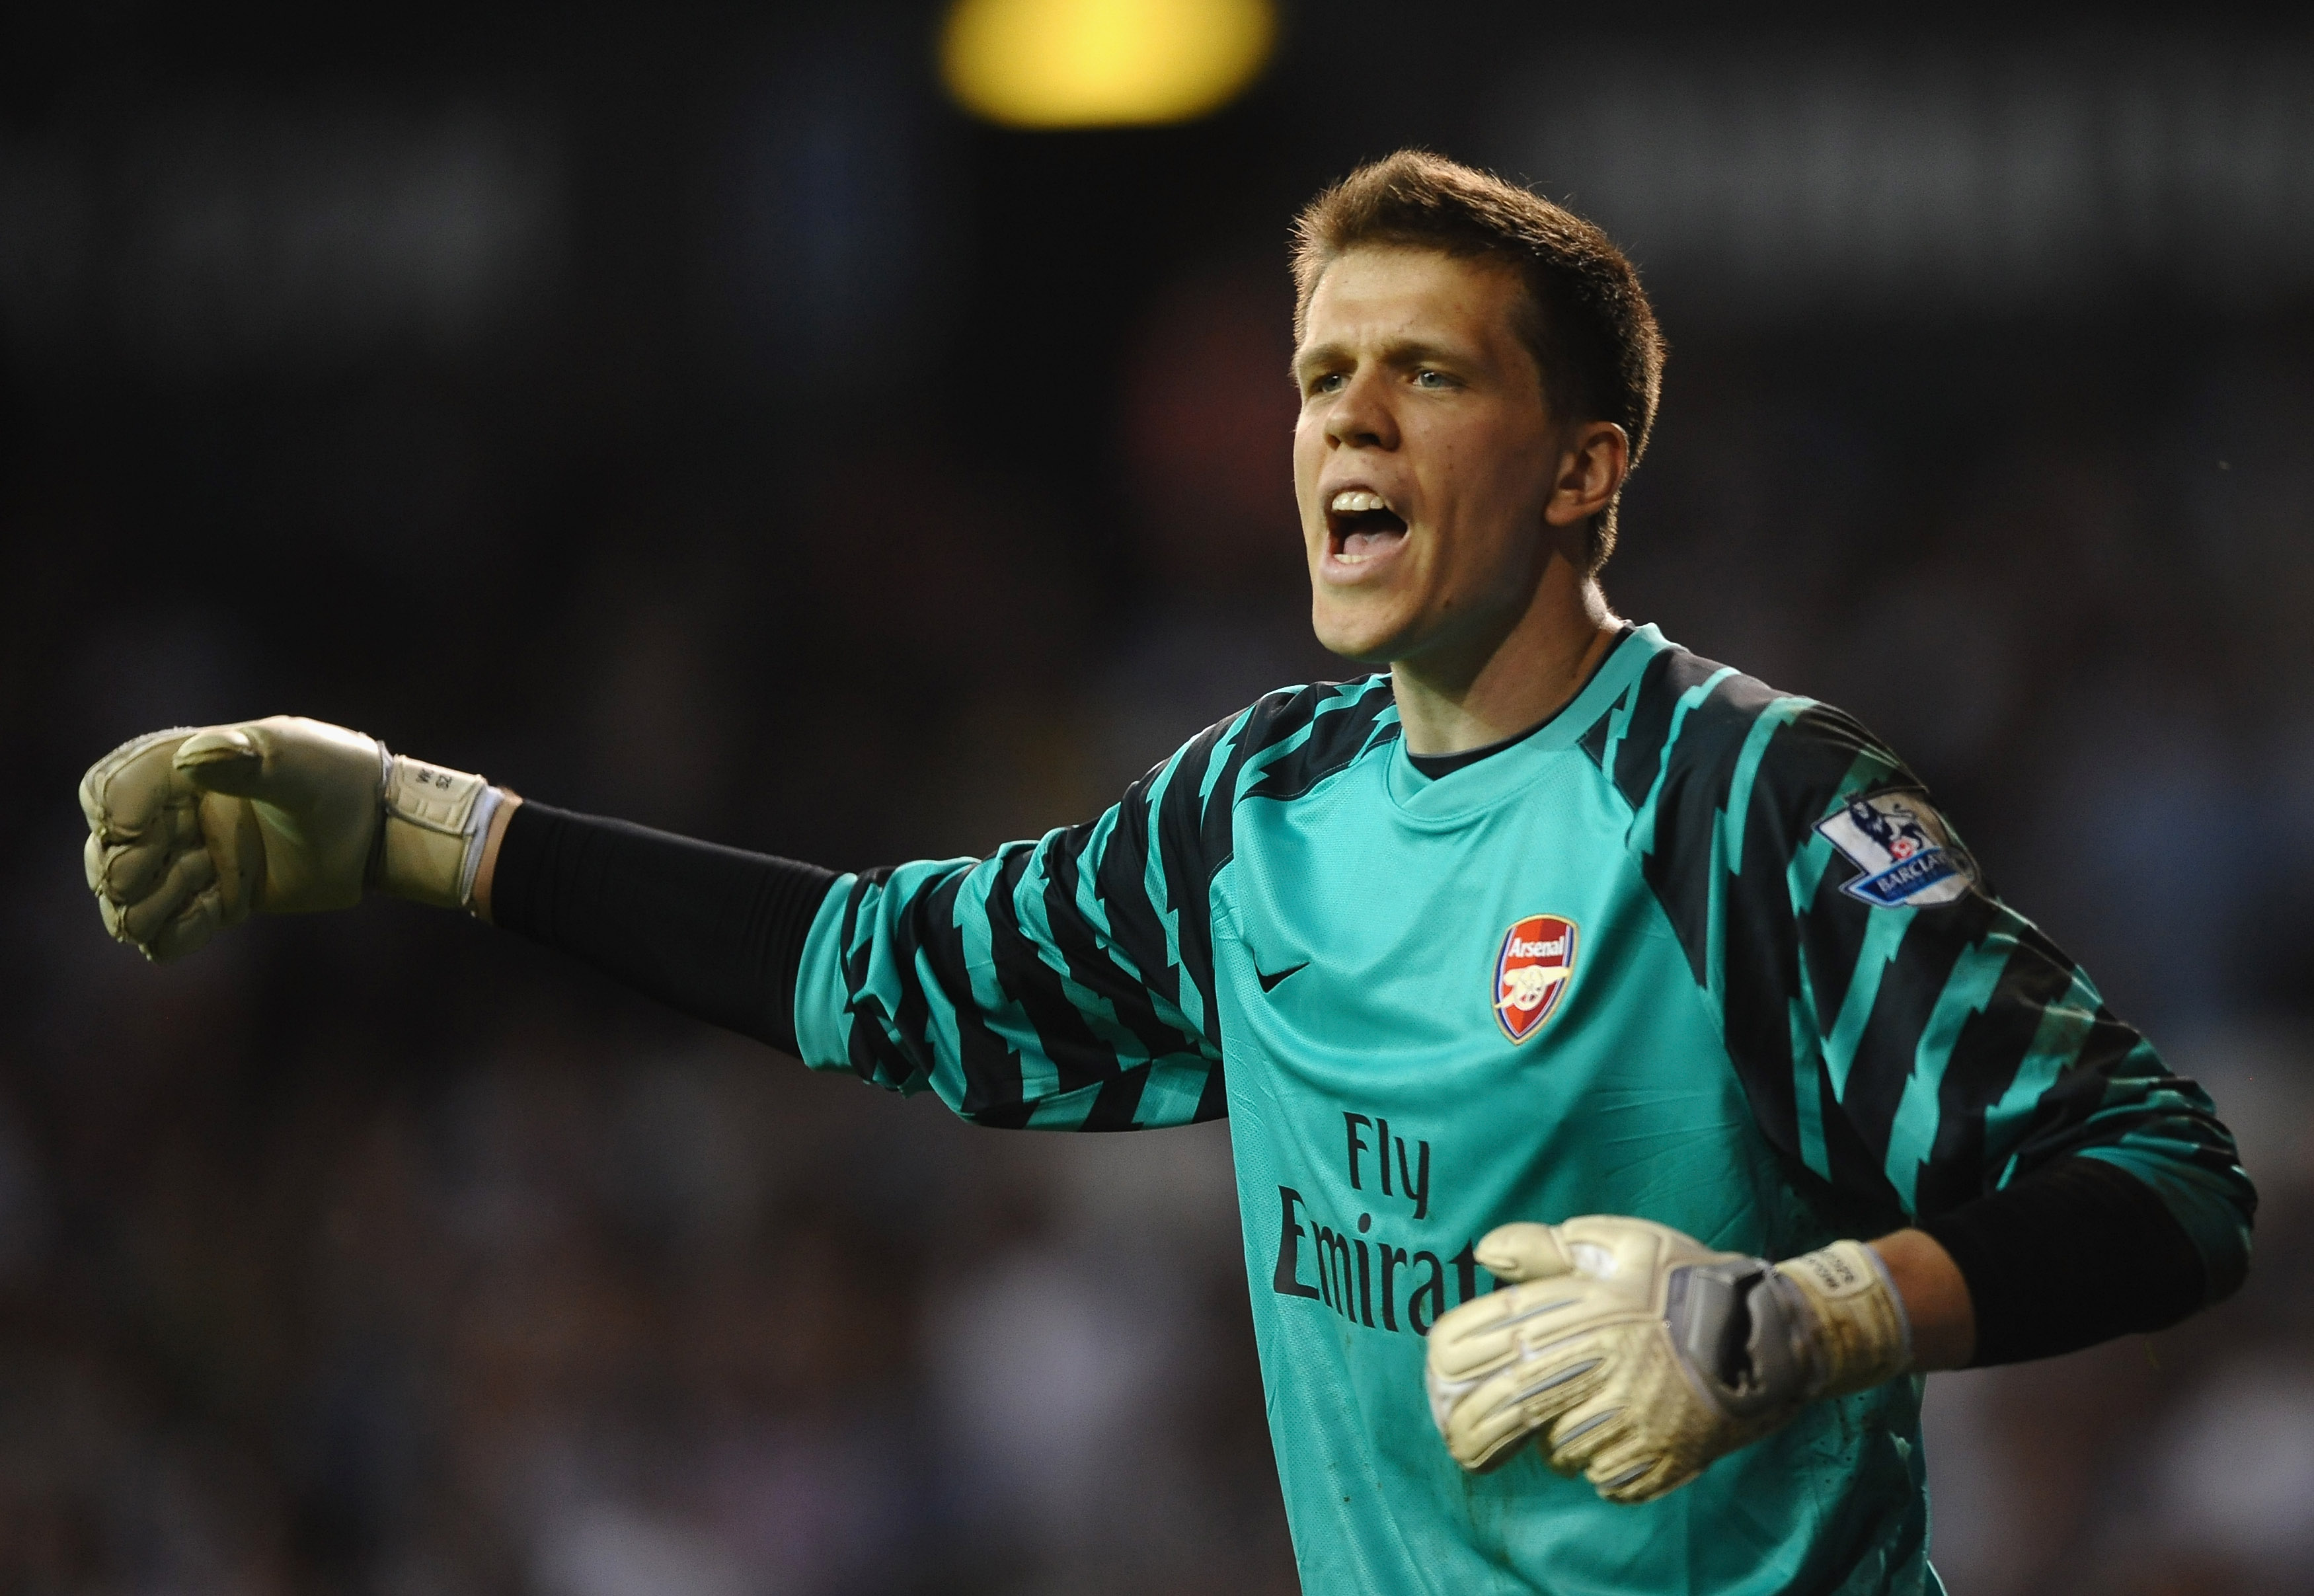 LONDON, ENGLAND - APRIL 20:  Wojciech Szczesny of Arsenal in action during the Barclays Premier League match between Tottenham Hotspur and Arsenal at White Hart Lane on April 20, 2011 in London, England.  (Photo by Laurence Griffiths/Getty Images)